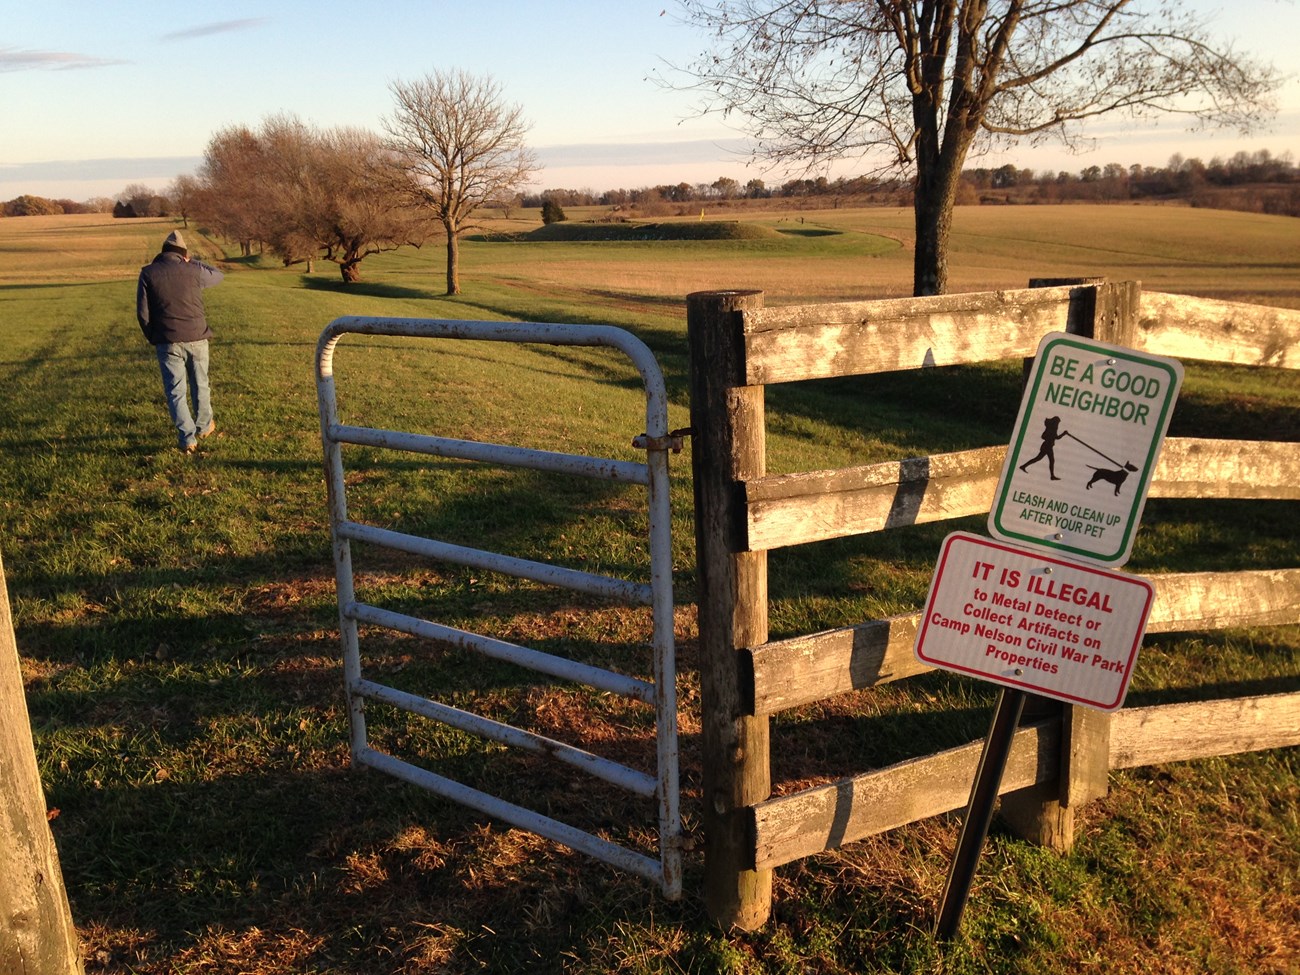 Man walks through gate with posted regulation signage